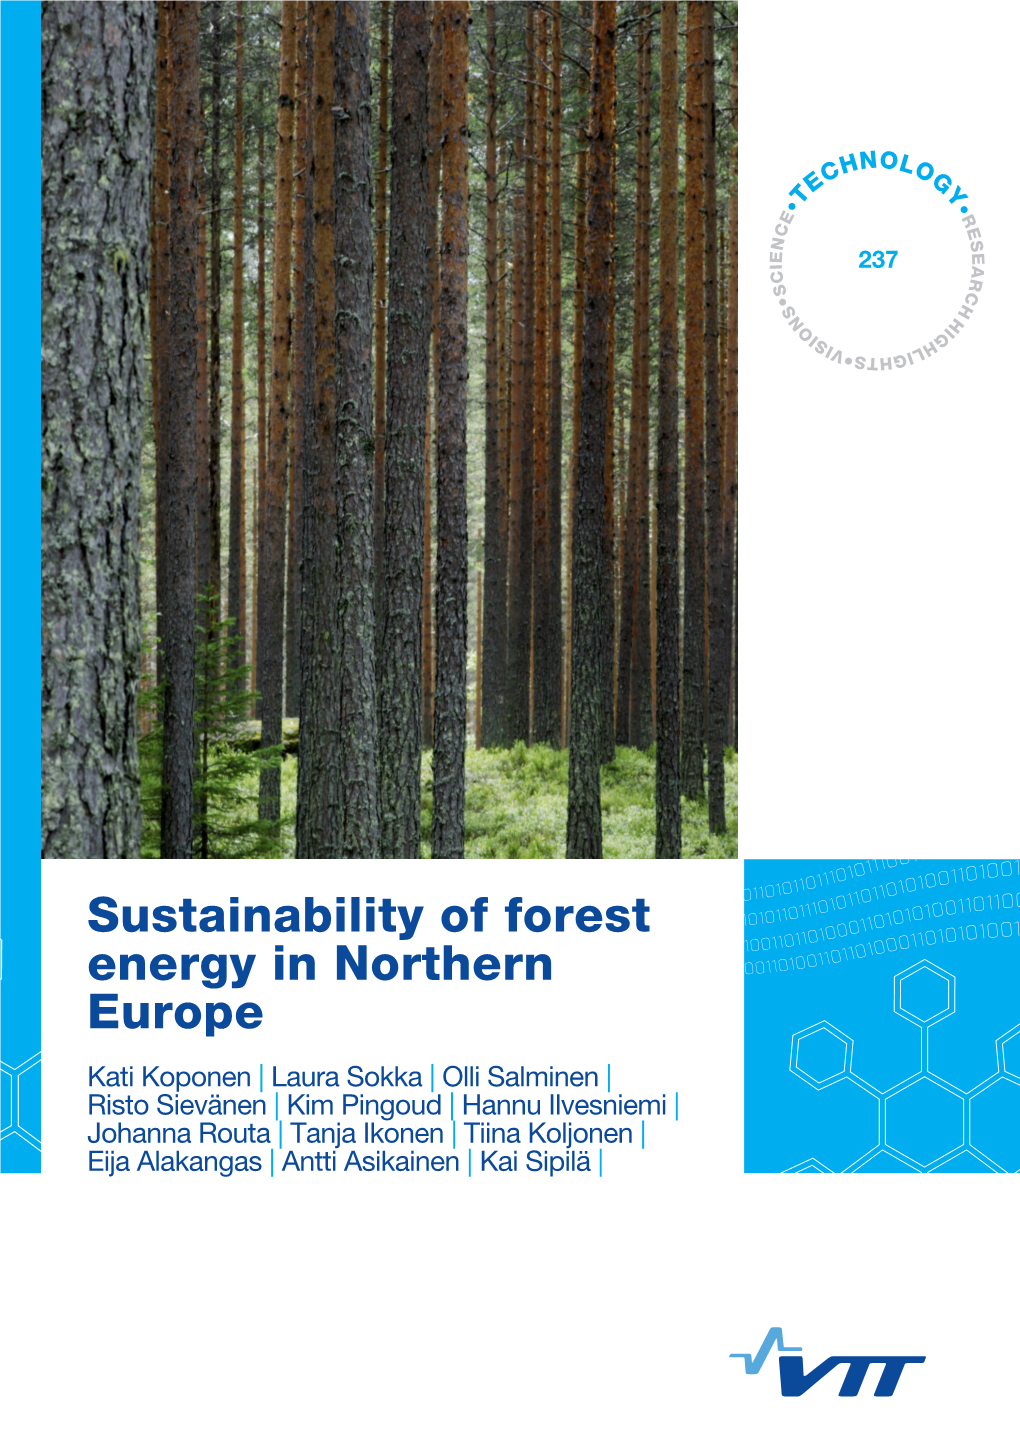 Sustainability of Forest Energy in Northern Europe I 237